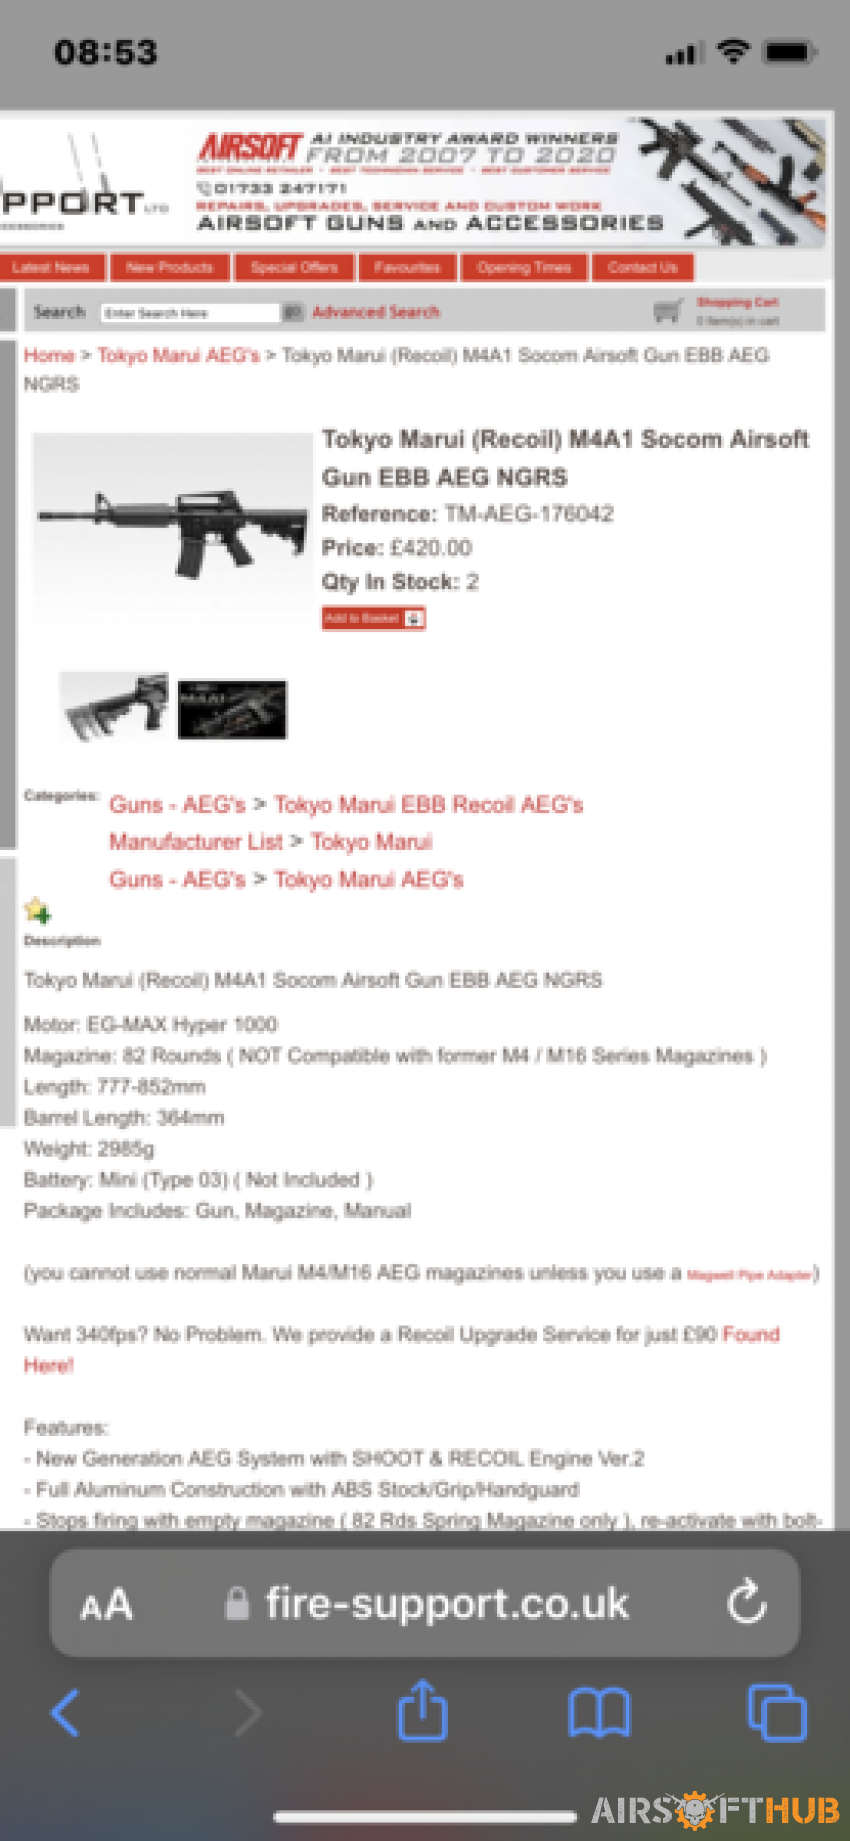 Tokyo Marui (Recoil) M4A1 Soc - Used airsoft equipment